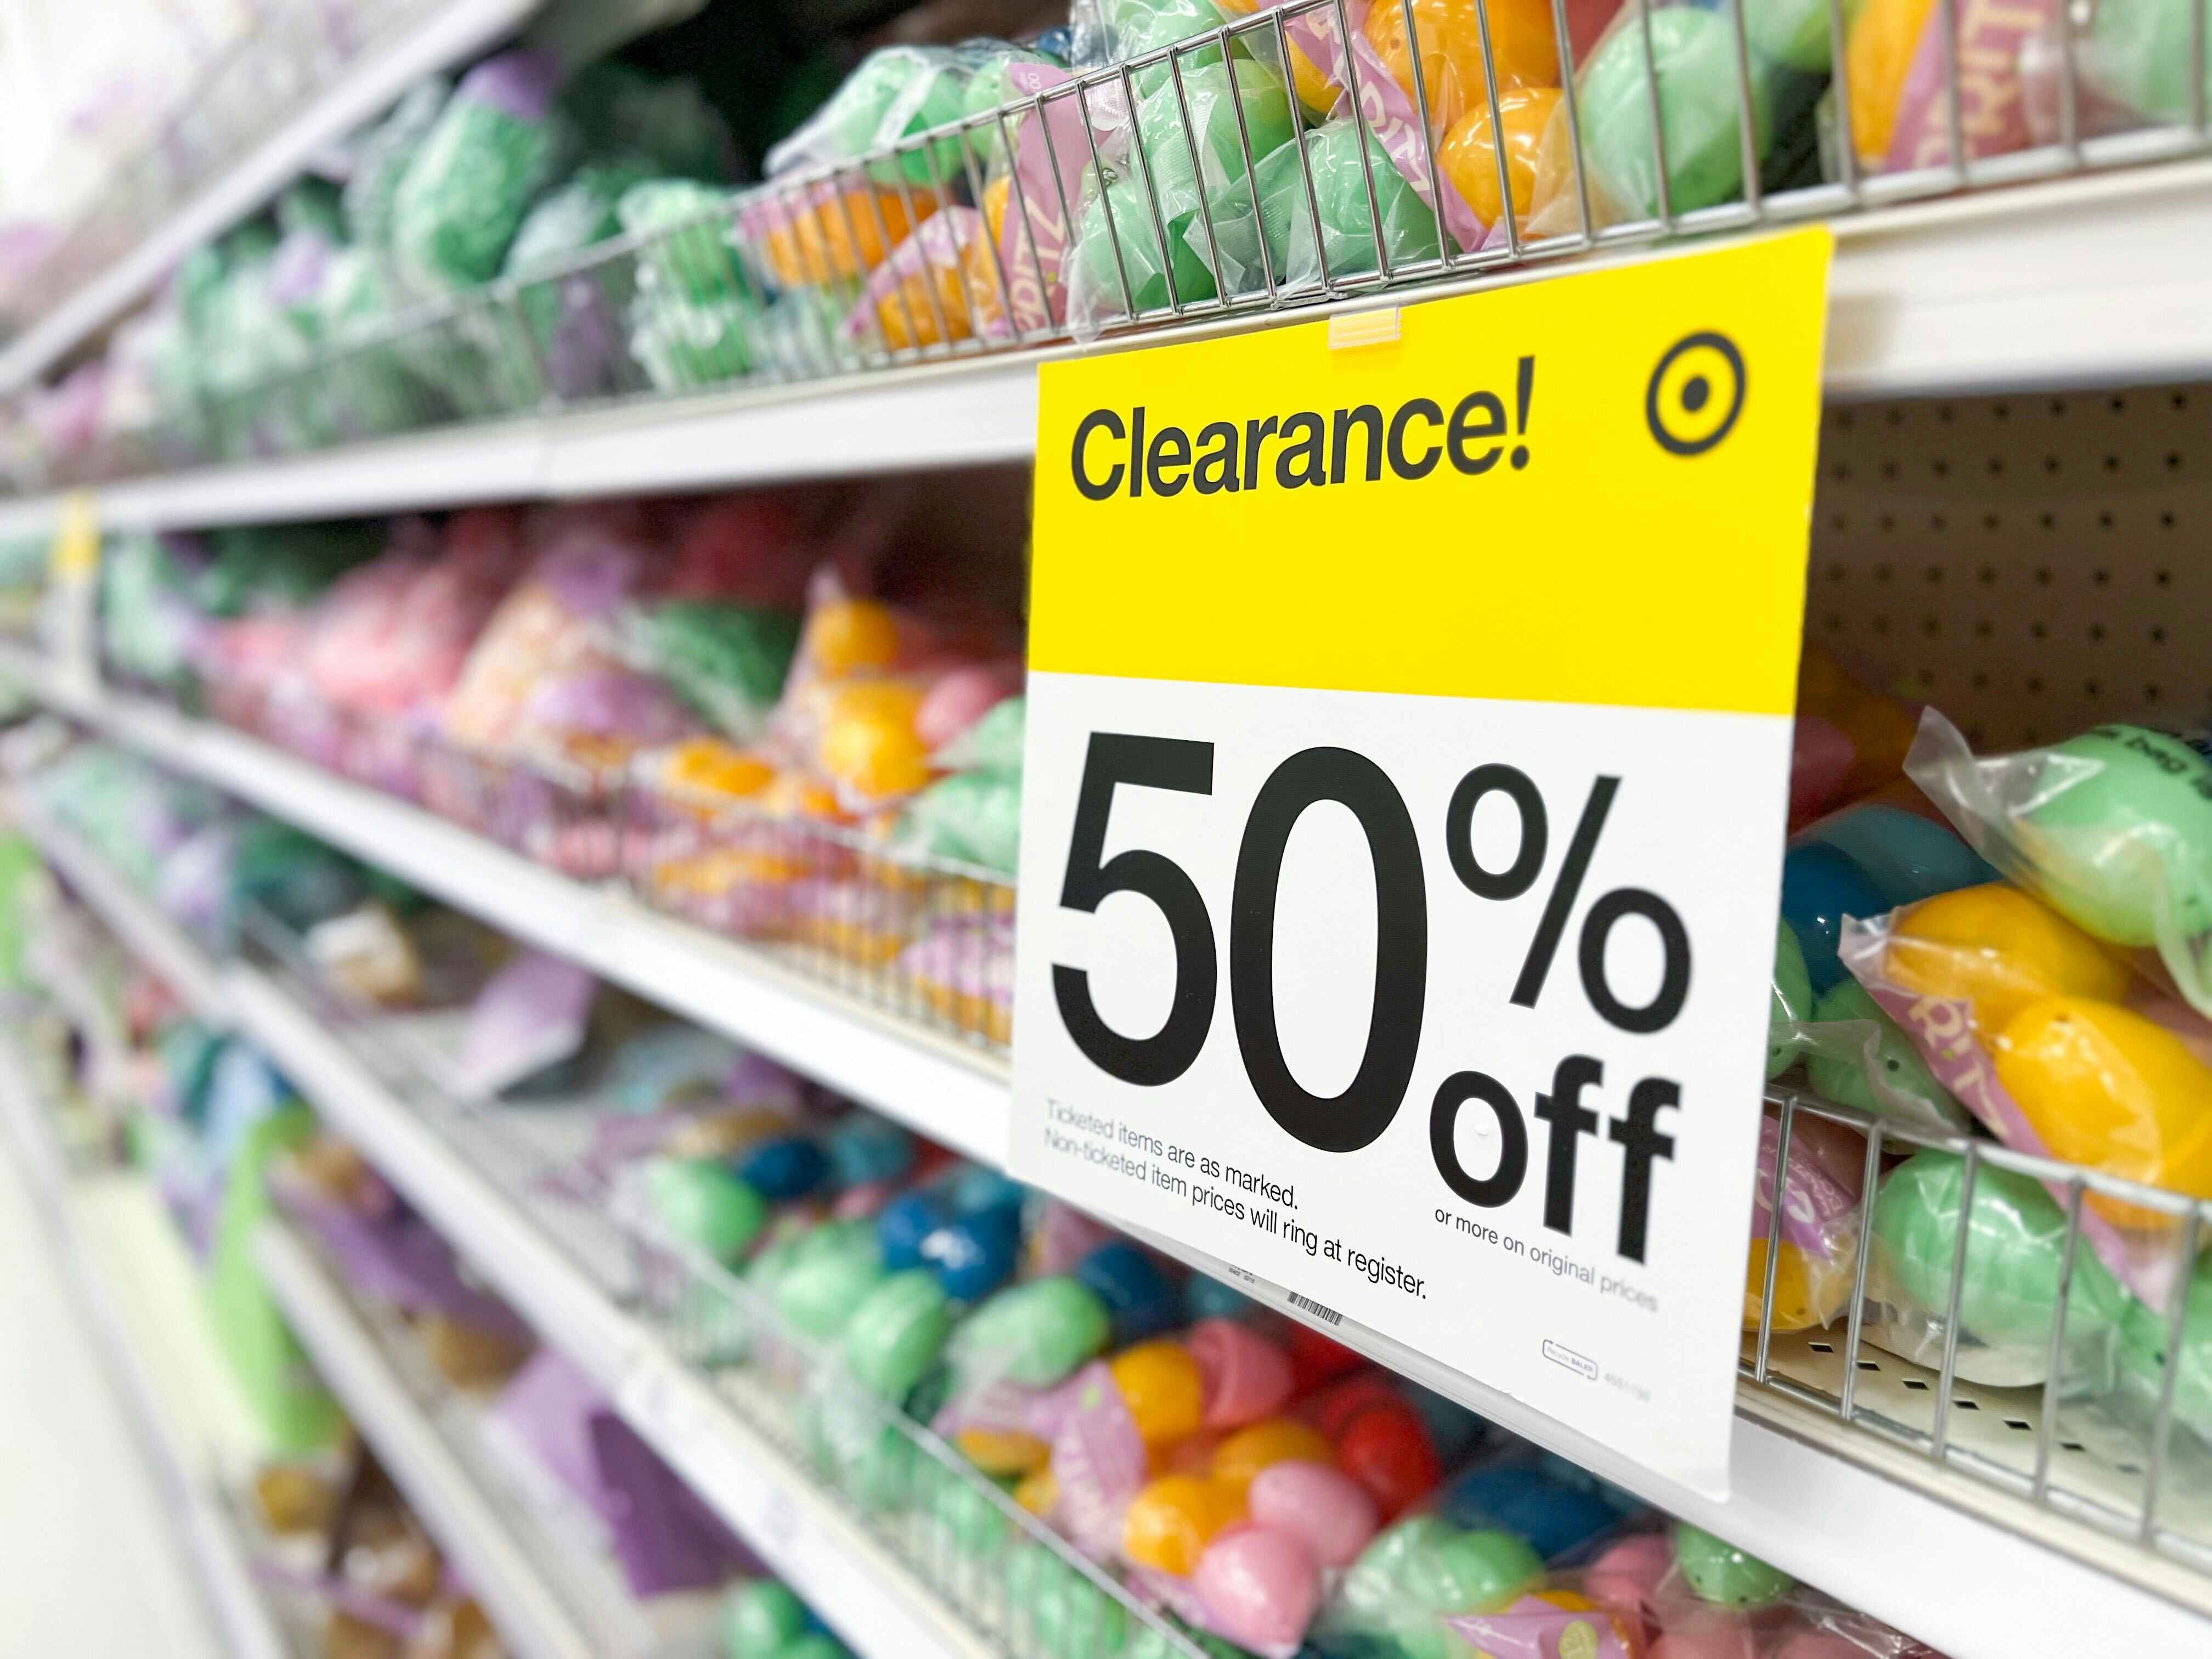 A target shelf full of Easter clearance items with a 50% off clearance sign on the shelf